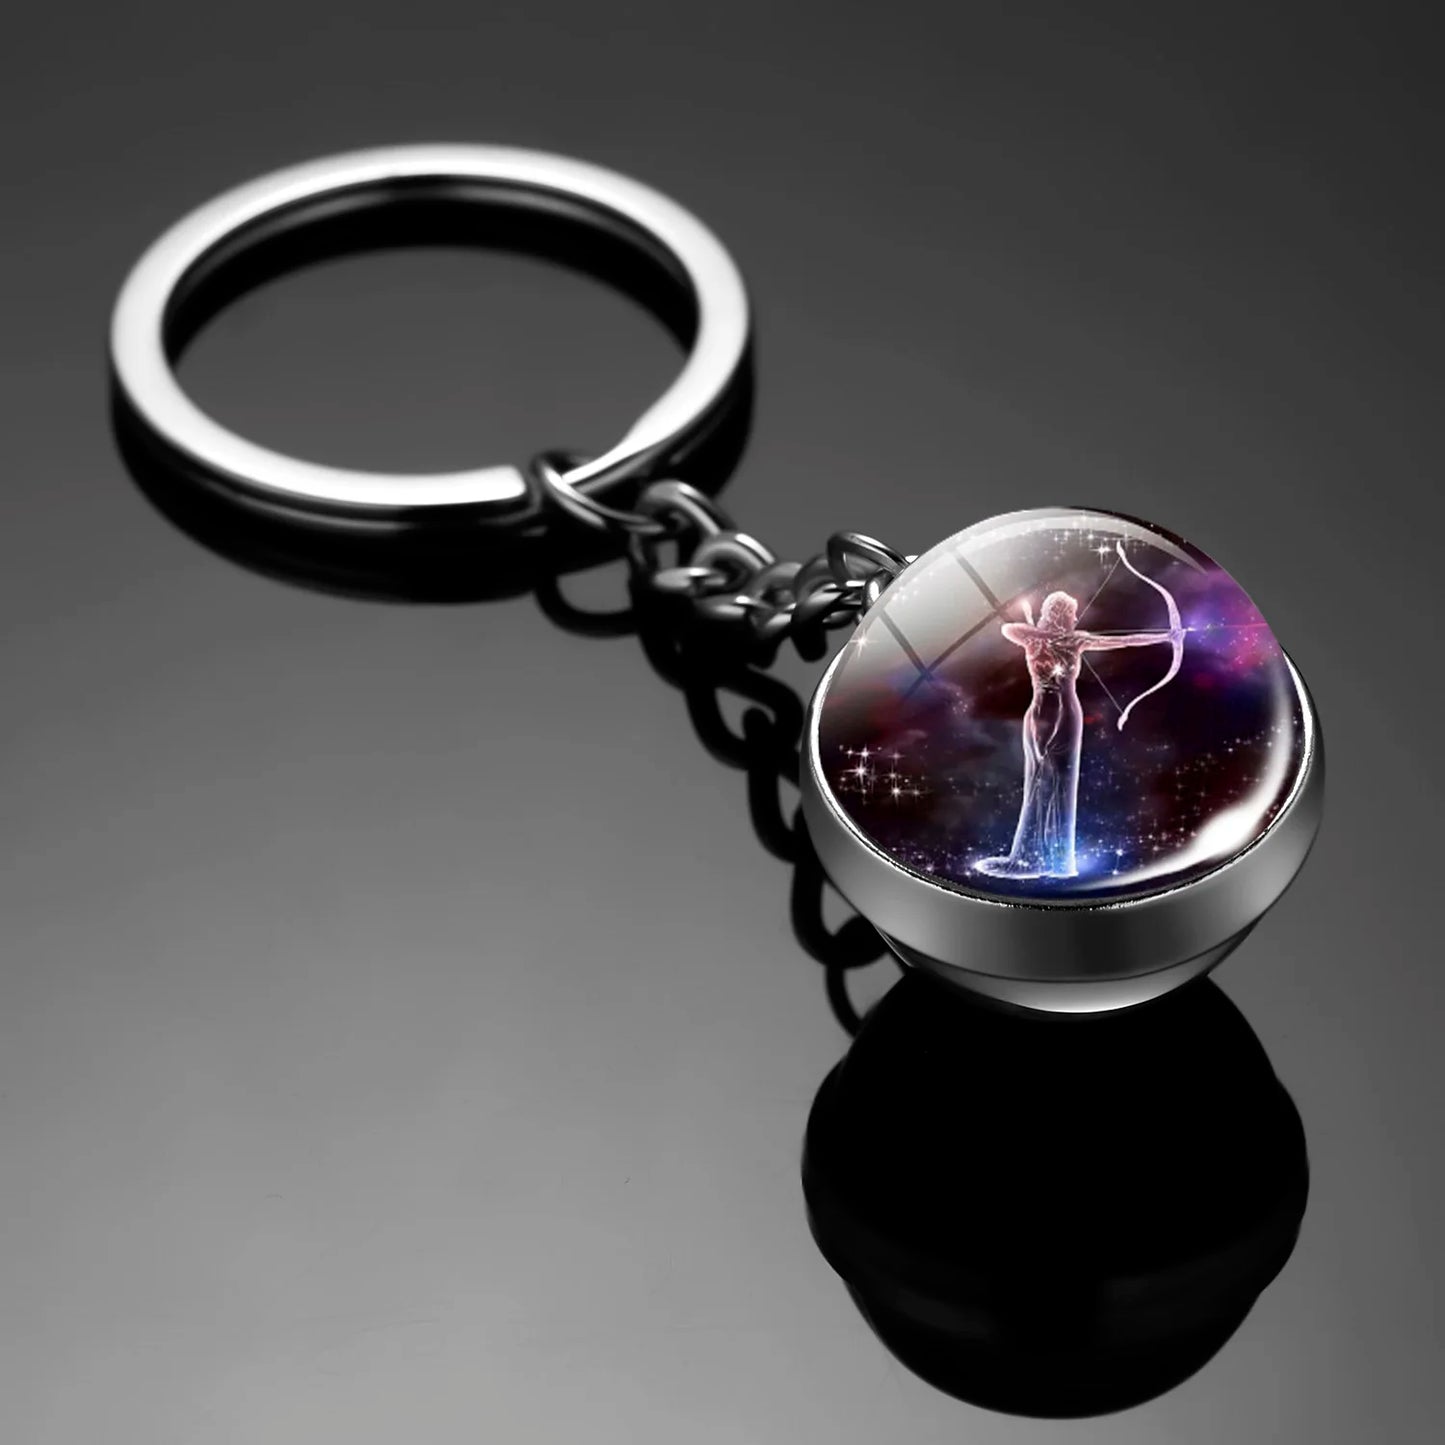 New Luminous 12 Constellation Glass Ball Key Rings: Double Sided Zodiac Signs Keychain for Women - Glow in the Dark Birthday Gift